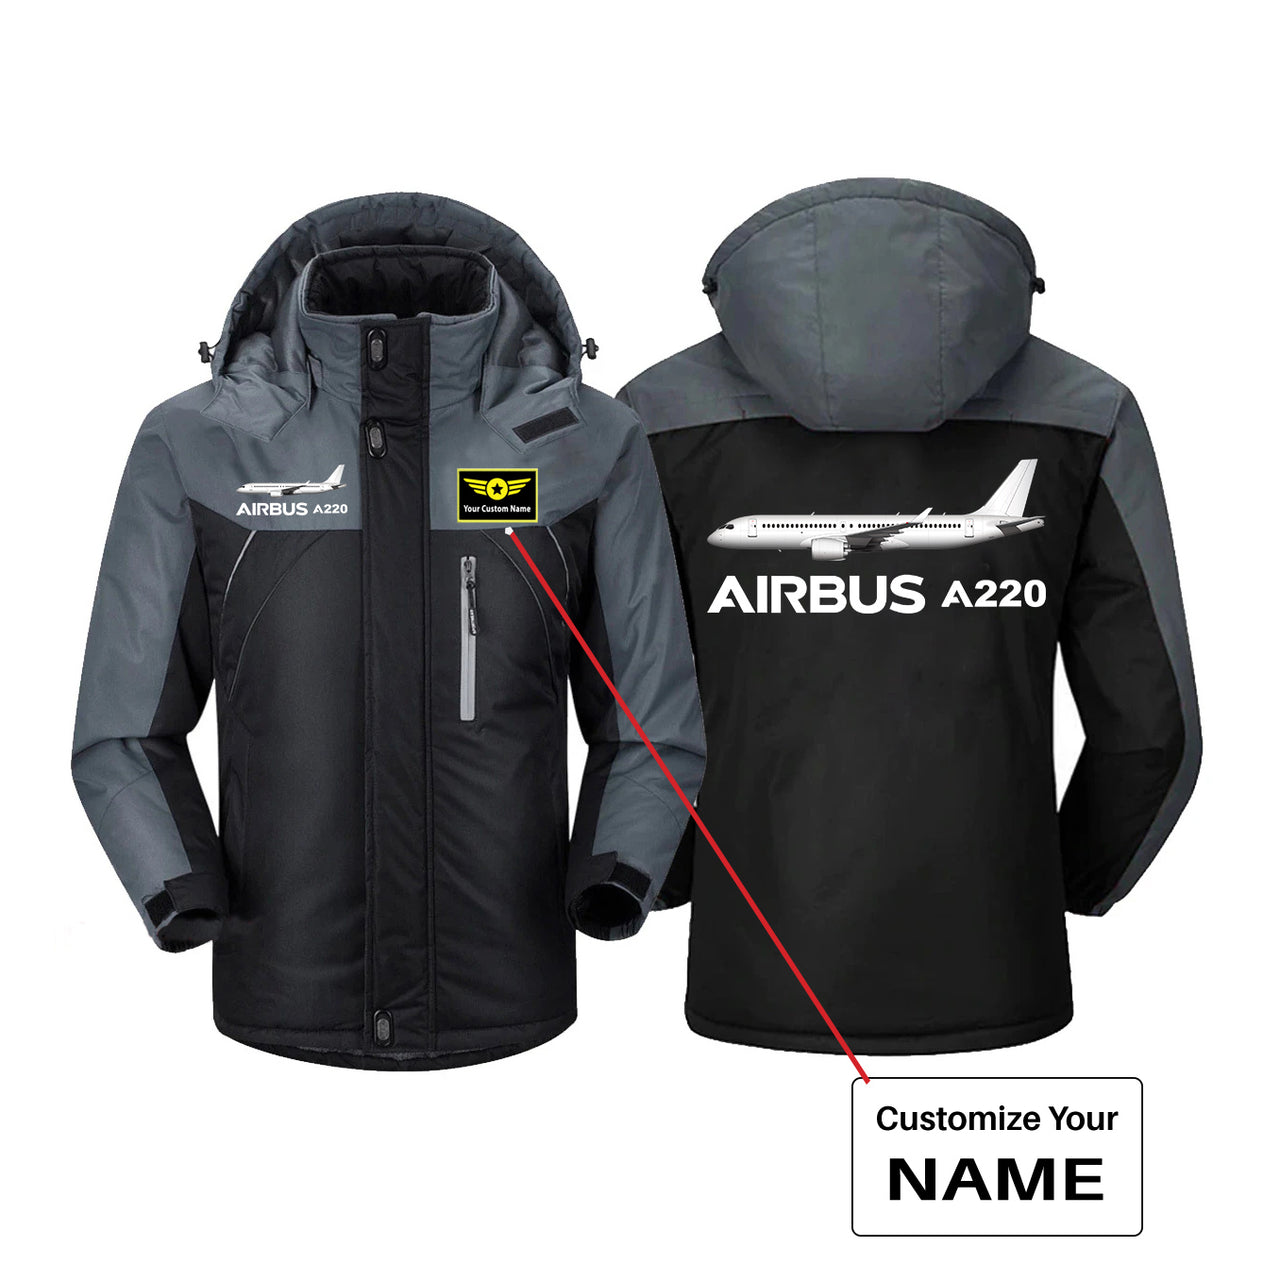 The Airbus A220 Designed Thick Winter Jackets